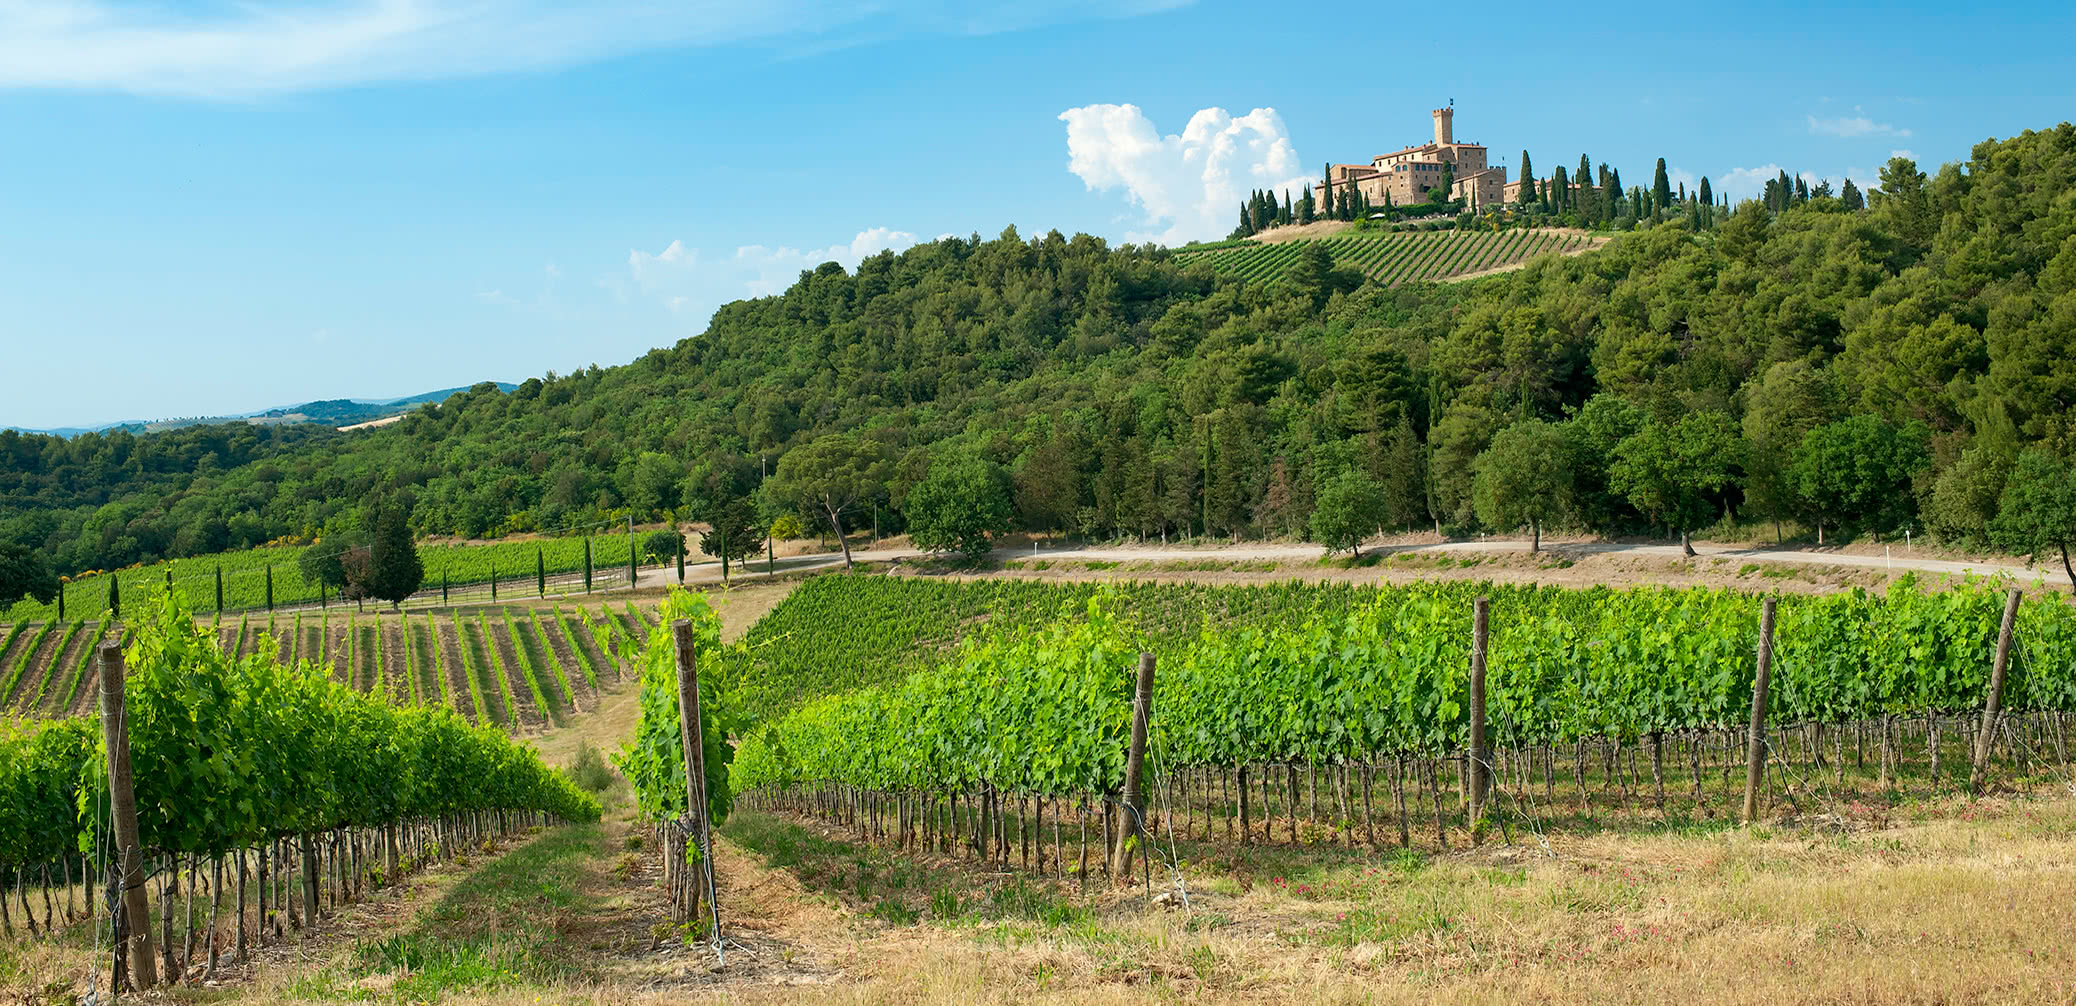 10-best-wine-hotels-in-tuscany